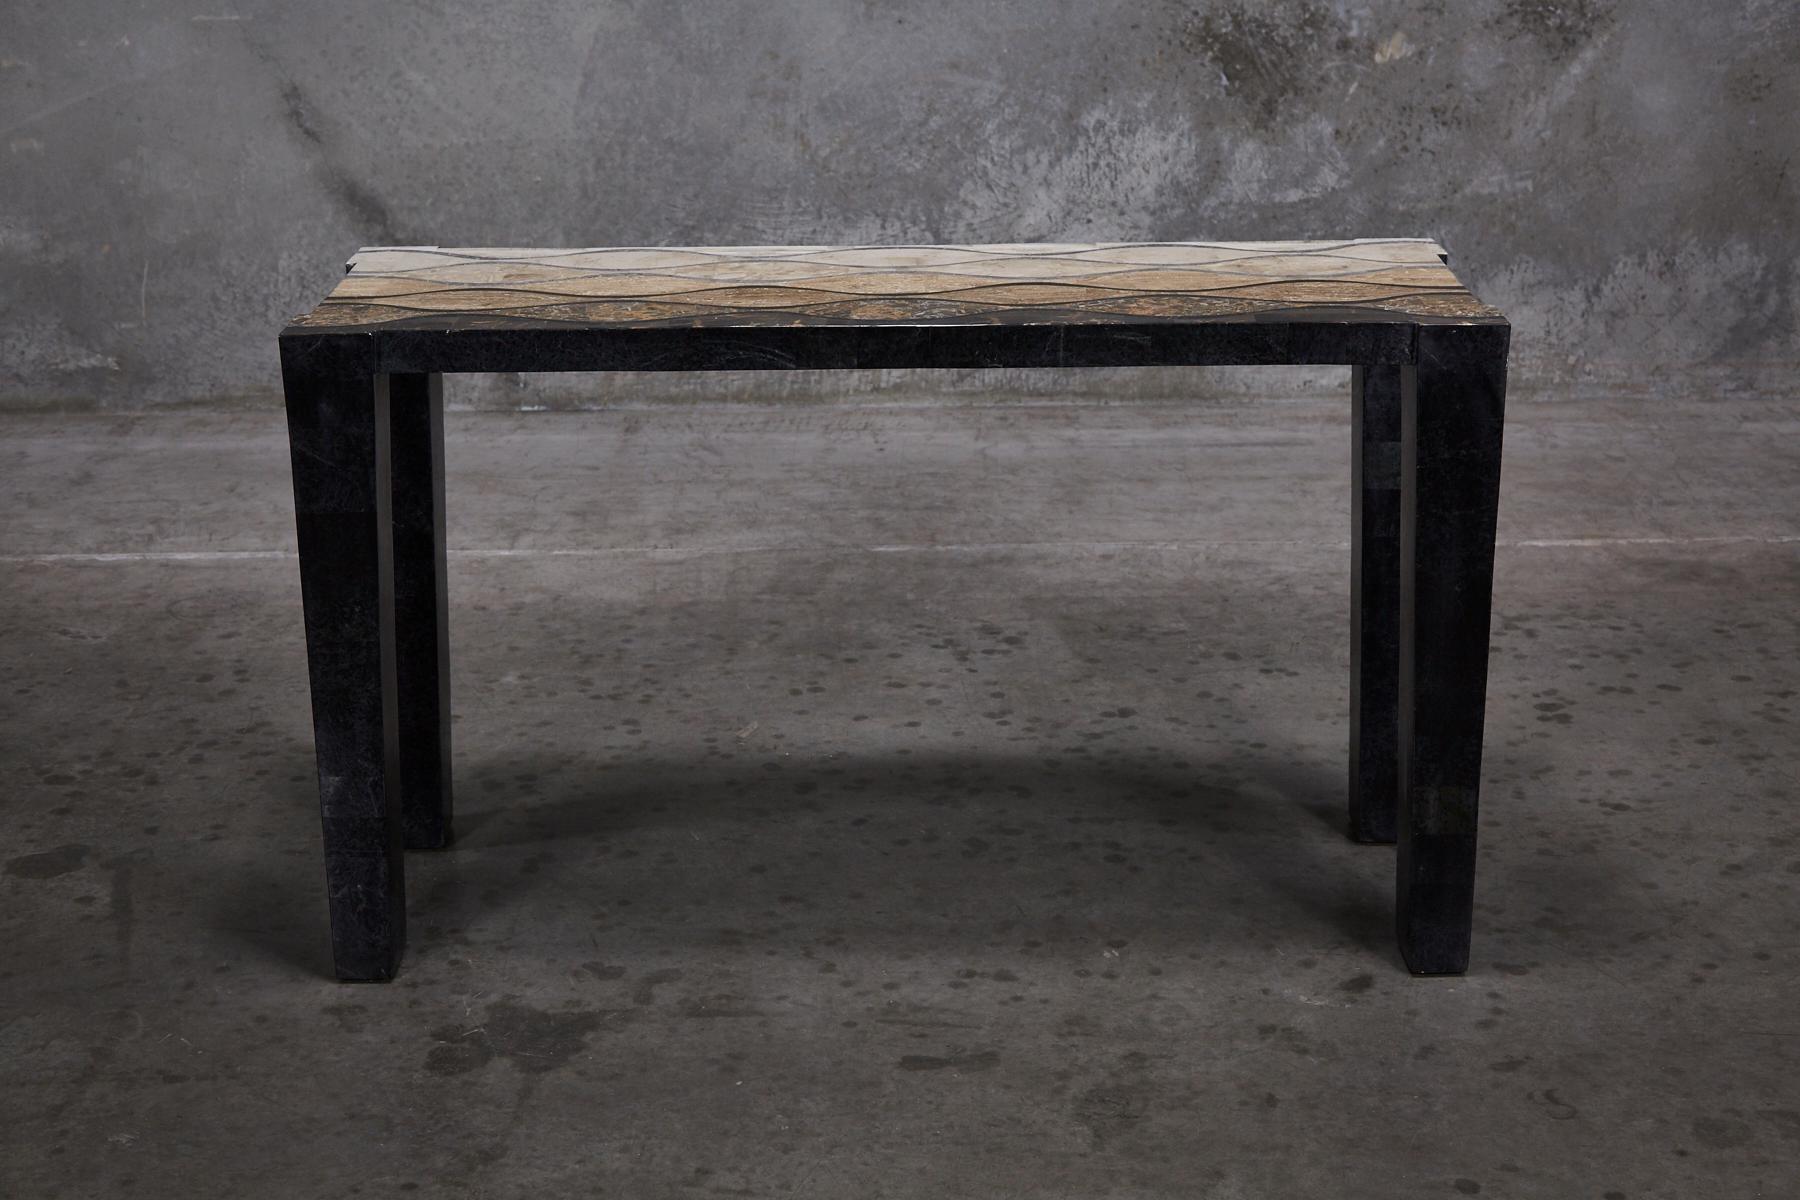 Simple rectilinear console table fully inlaid with tessellated stone. Legs in solid black stone. Tabletop inlaid with stylized wavy pattern executed in snakeskin stone, woodstone and cantor stone inlay. Handmade in the Philippines.

All furnishings